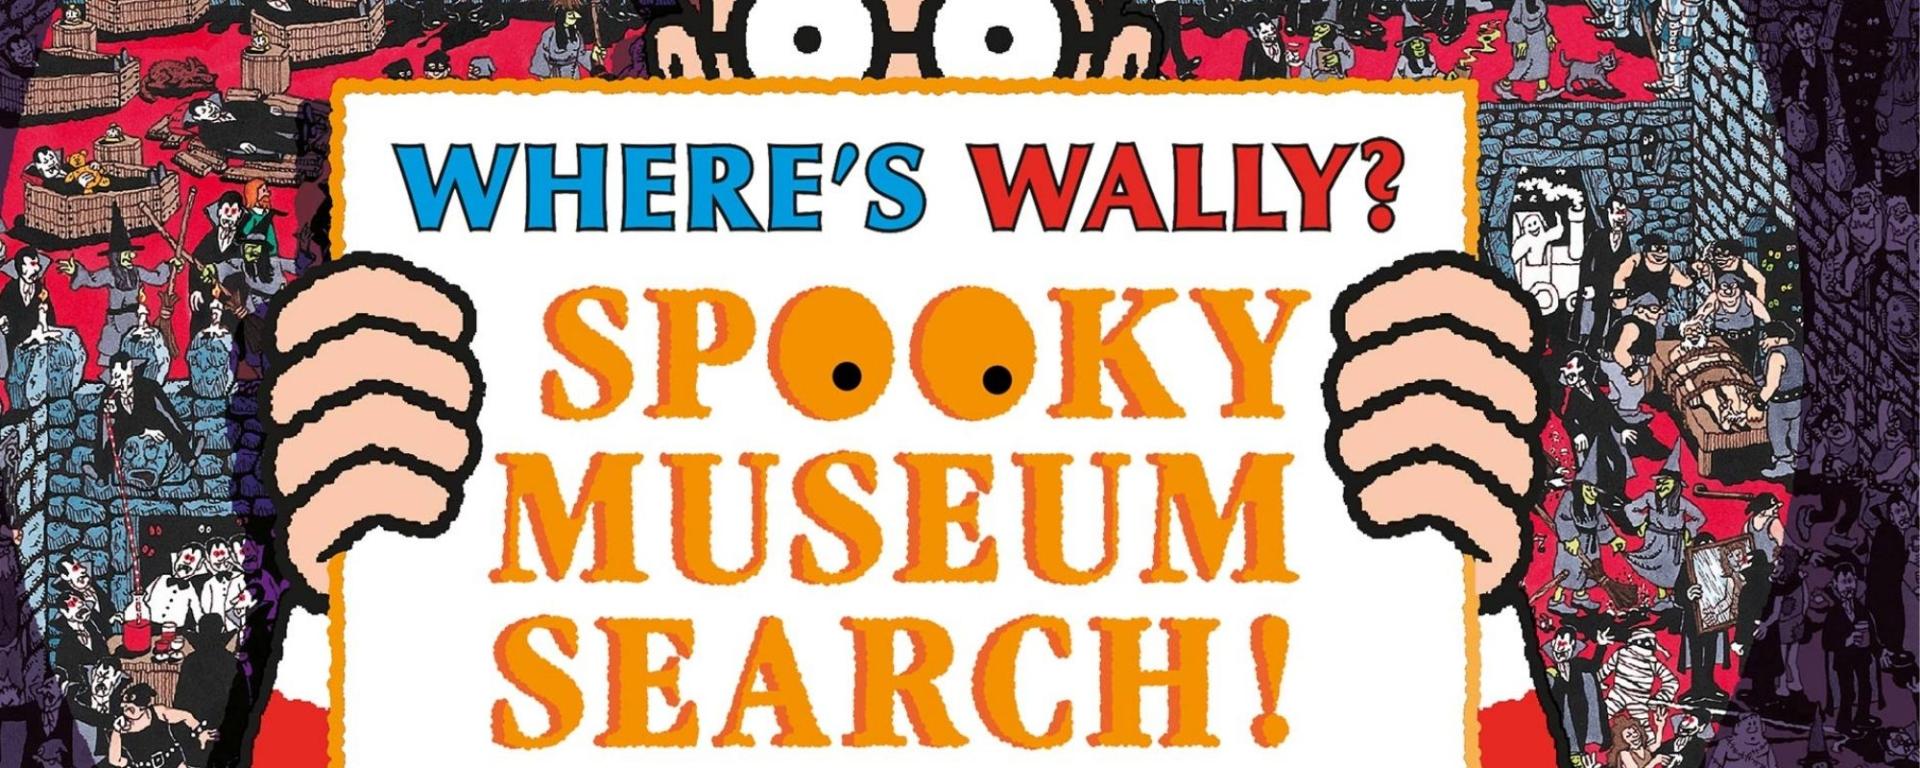 Where's Wally Spooky Museum Search